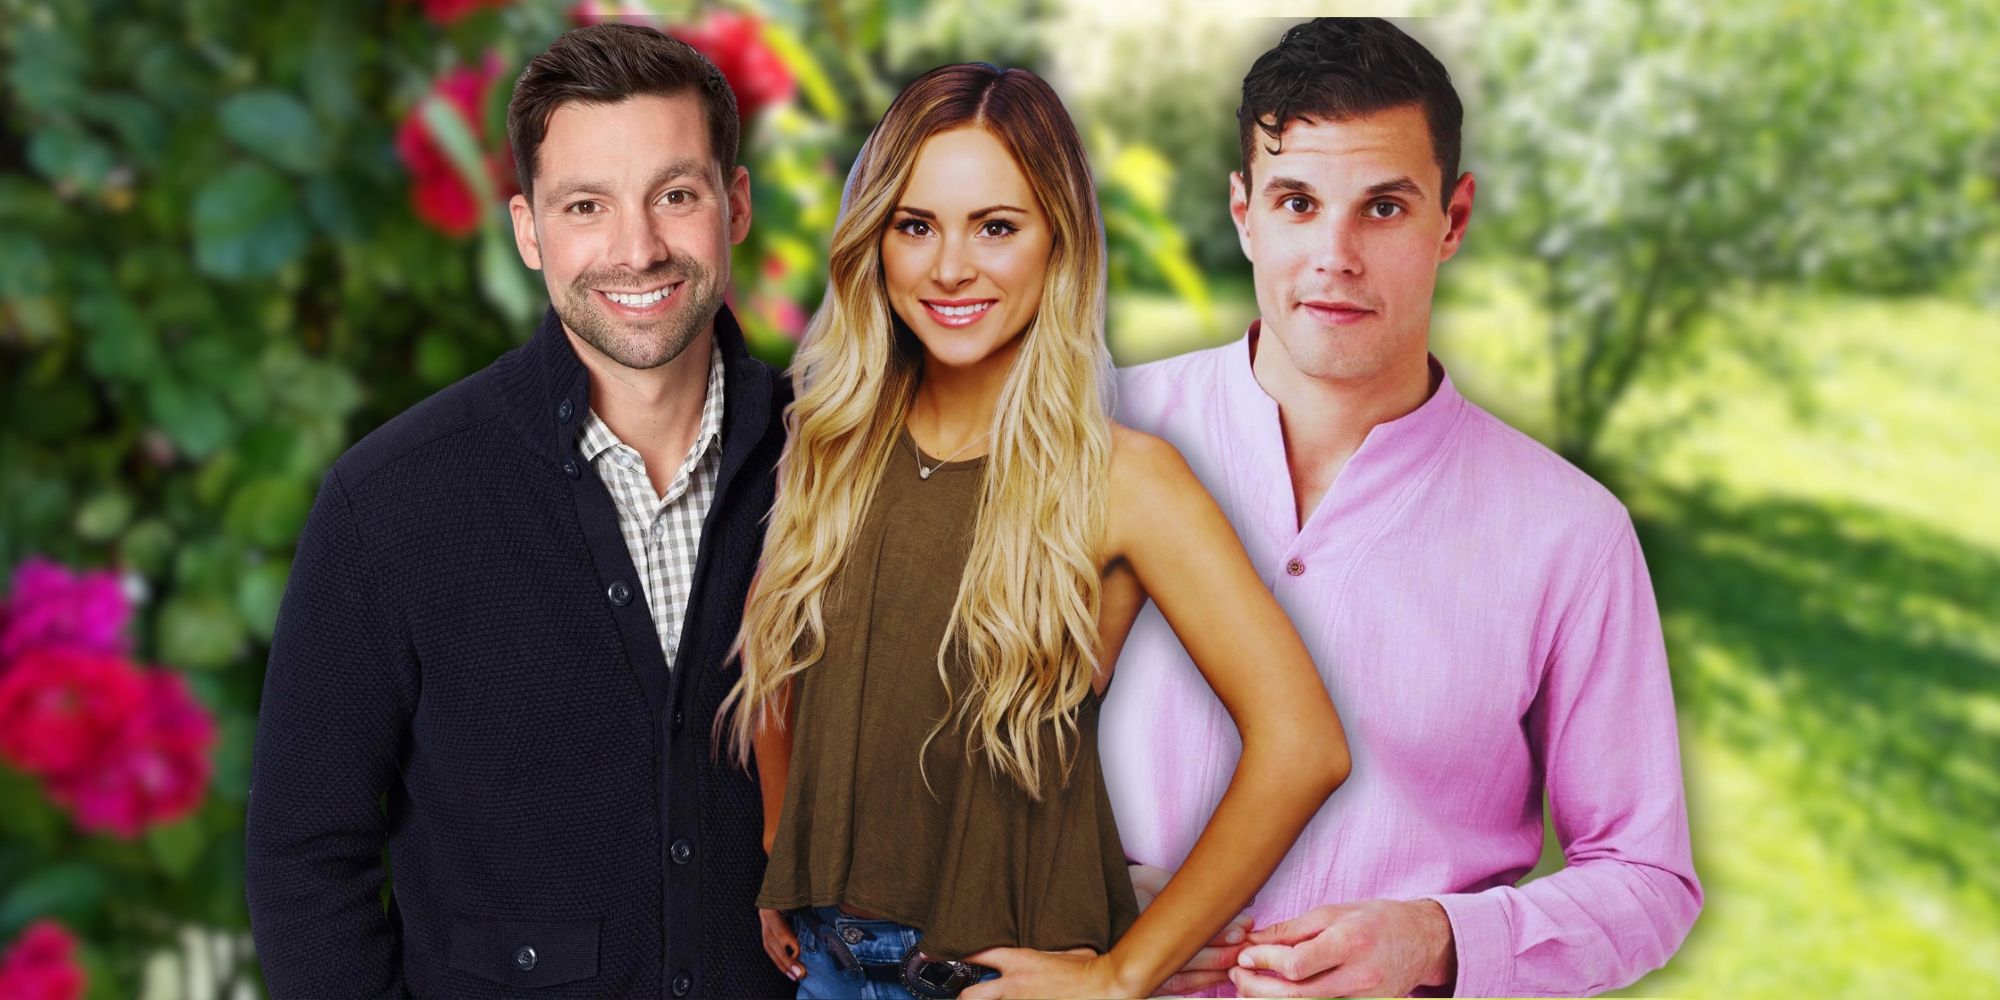 12 Bachelor Nation Contestants Who Were Single Parents Before The Show